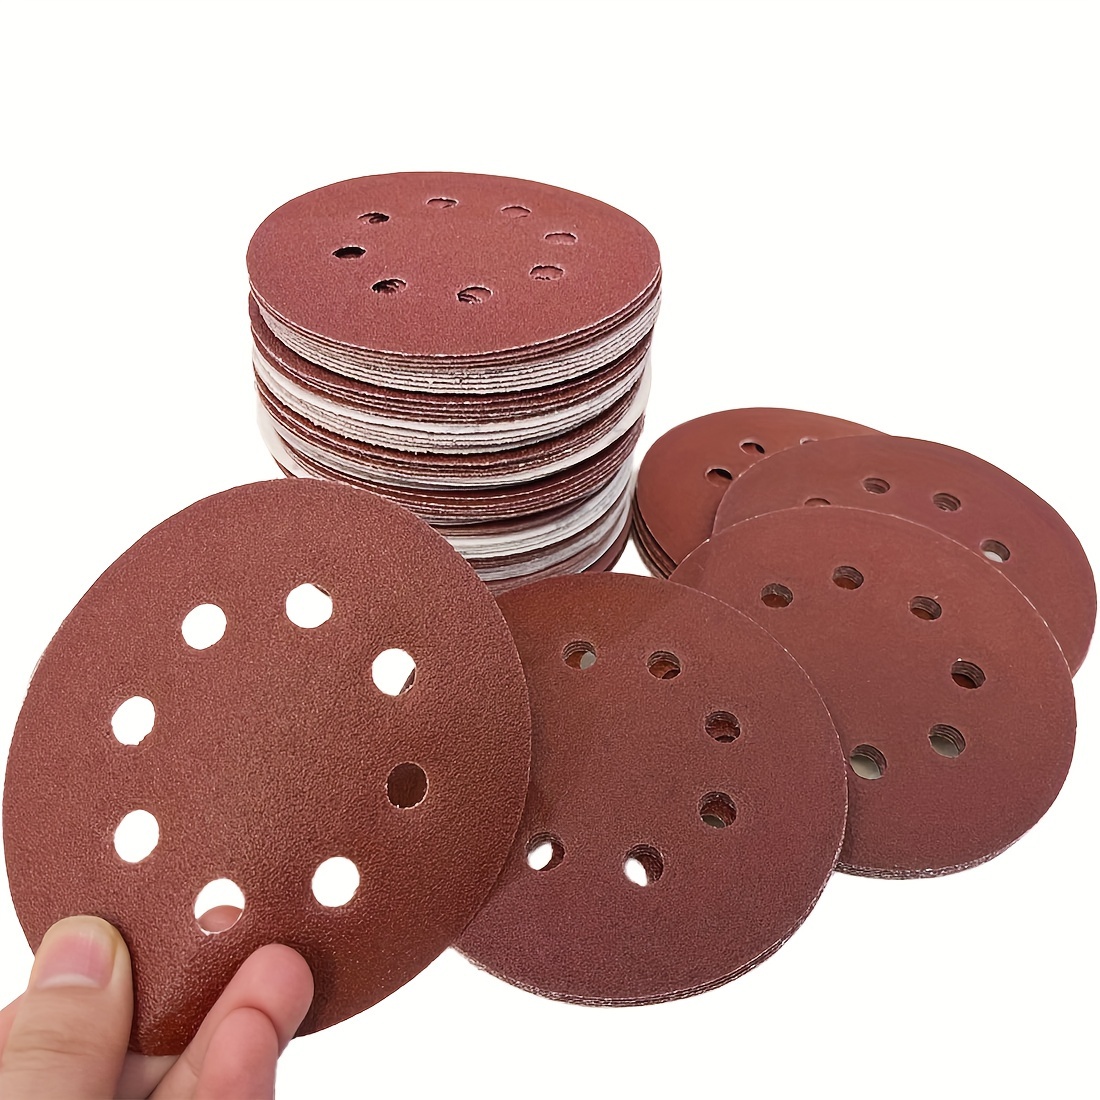 

Value Pack 110pcs 5in/125mm 8-hole Sanding Discs Set With Hook And Loop Backing, Assorted Grits (40/60/80/100/120/150/180/240/320/400/600), Aluminum Oxide Round Sandpaper For Polishing And Finishing